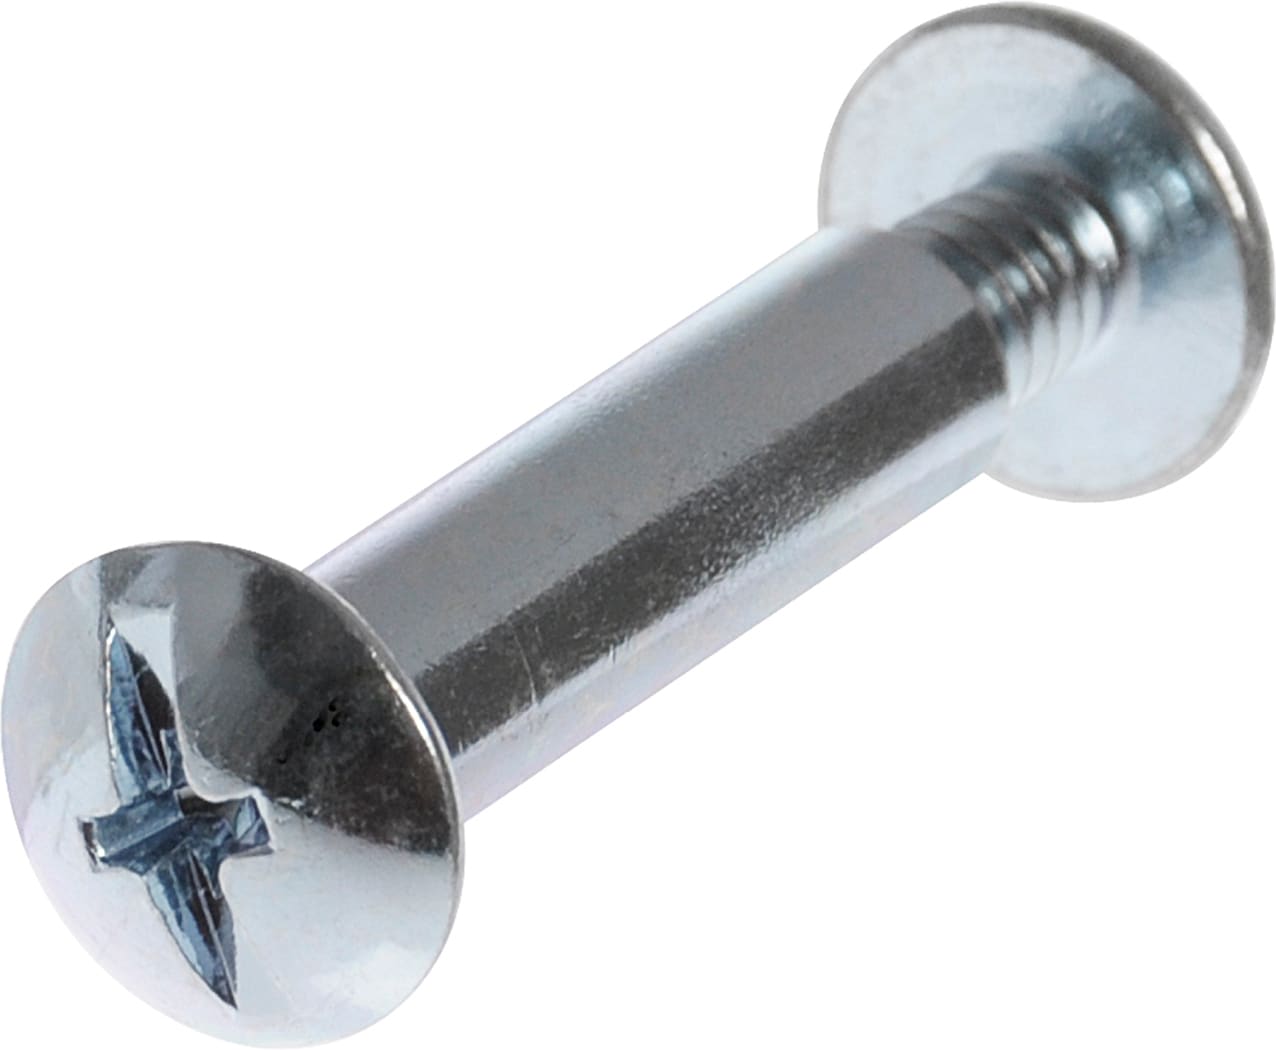 Nickel Plated' 15 x 5 mm Chicago Screw